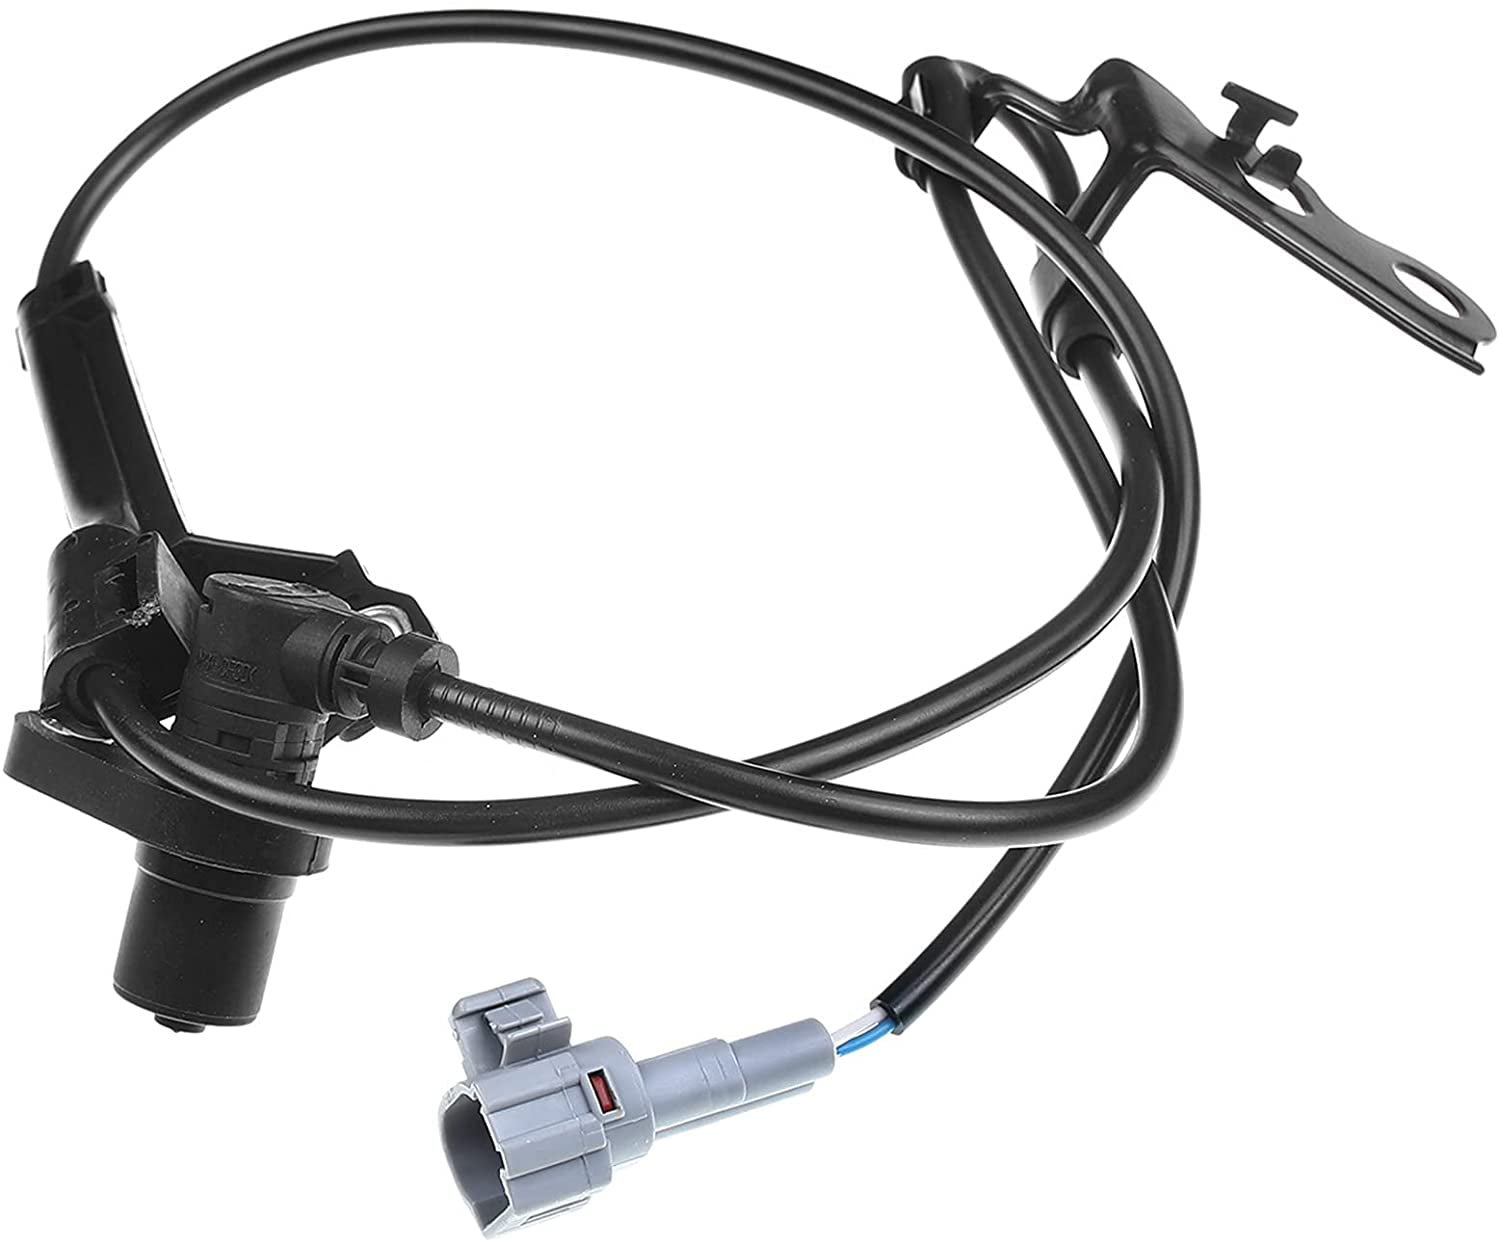 Front Left ABS WHEEL SPEED SENSOR Fits 2003-2008 Corolla Replace ALS1394 5S6831 2ABS0299 AB1646 V70720031 970758 SS20265 8954312070 ALS1394